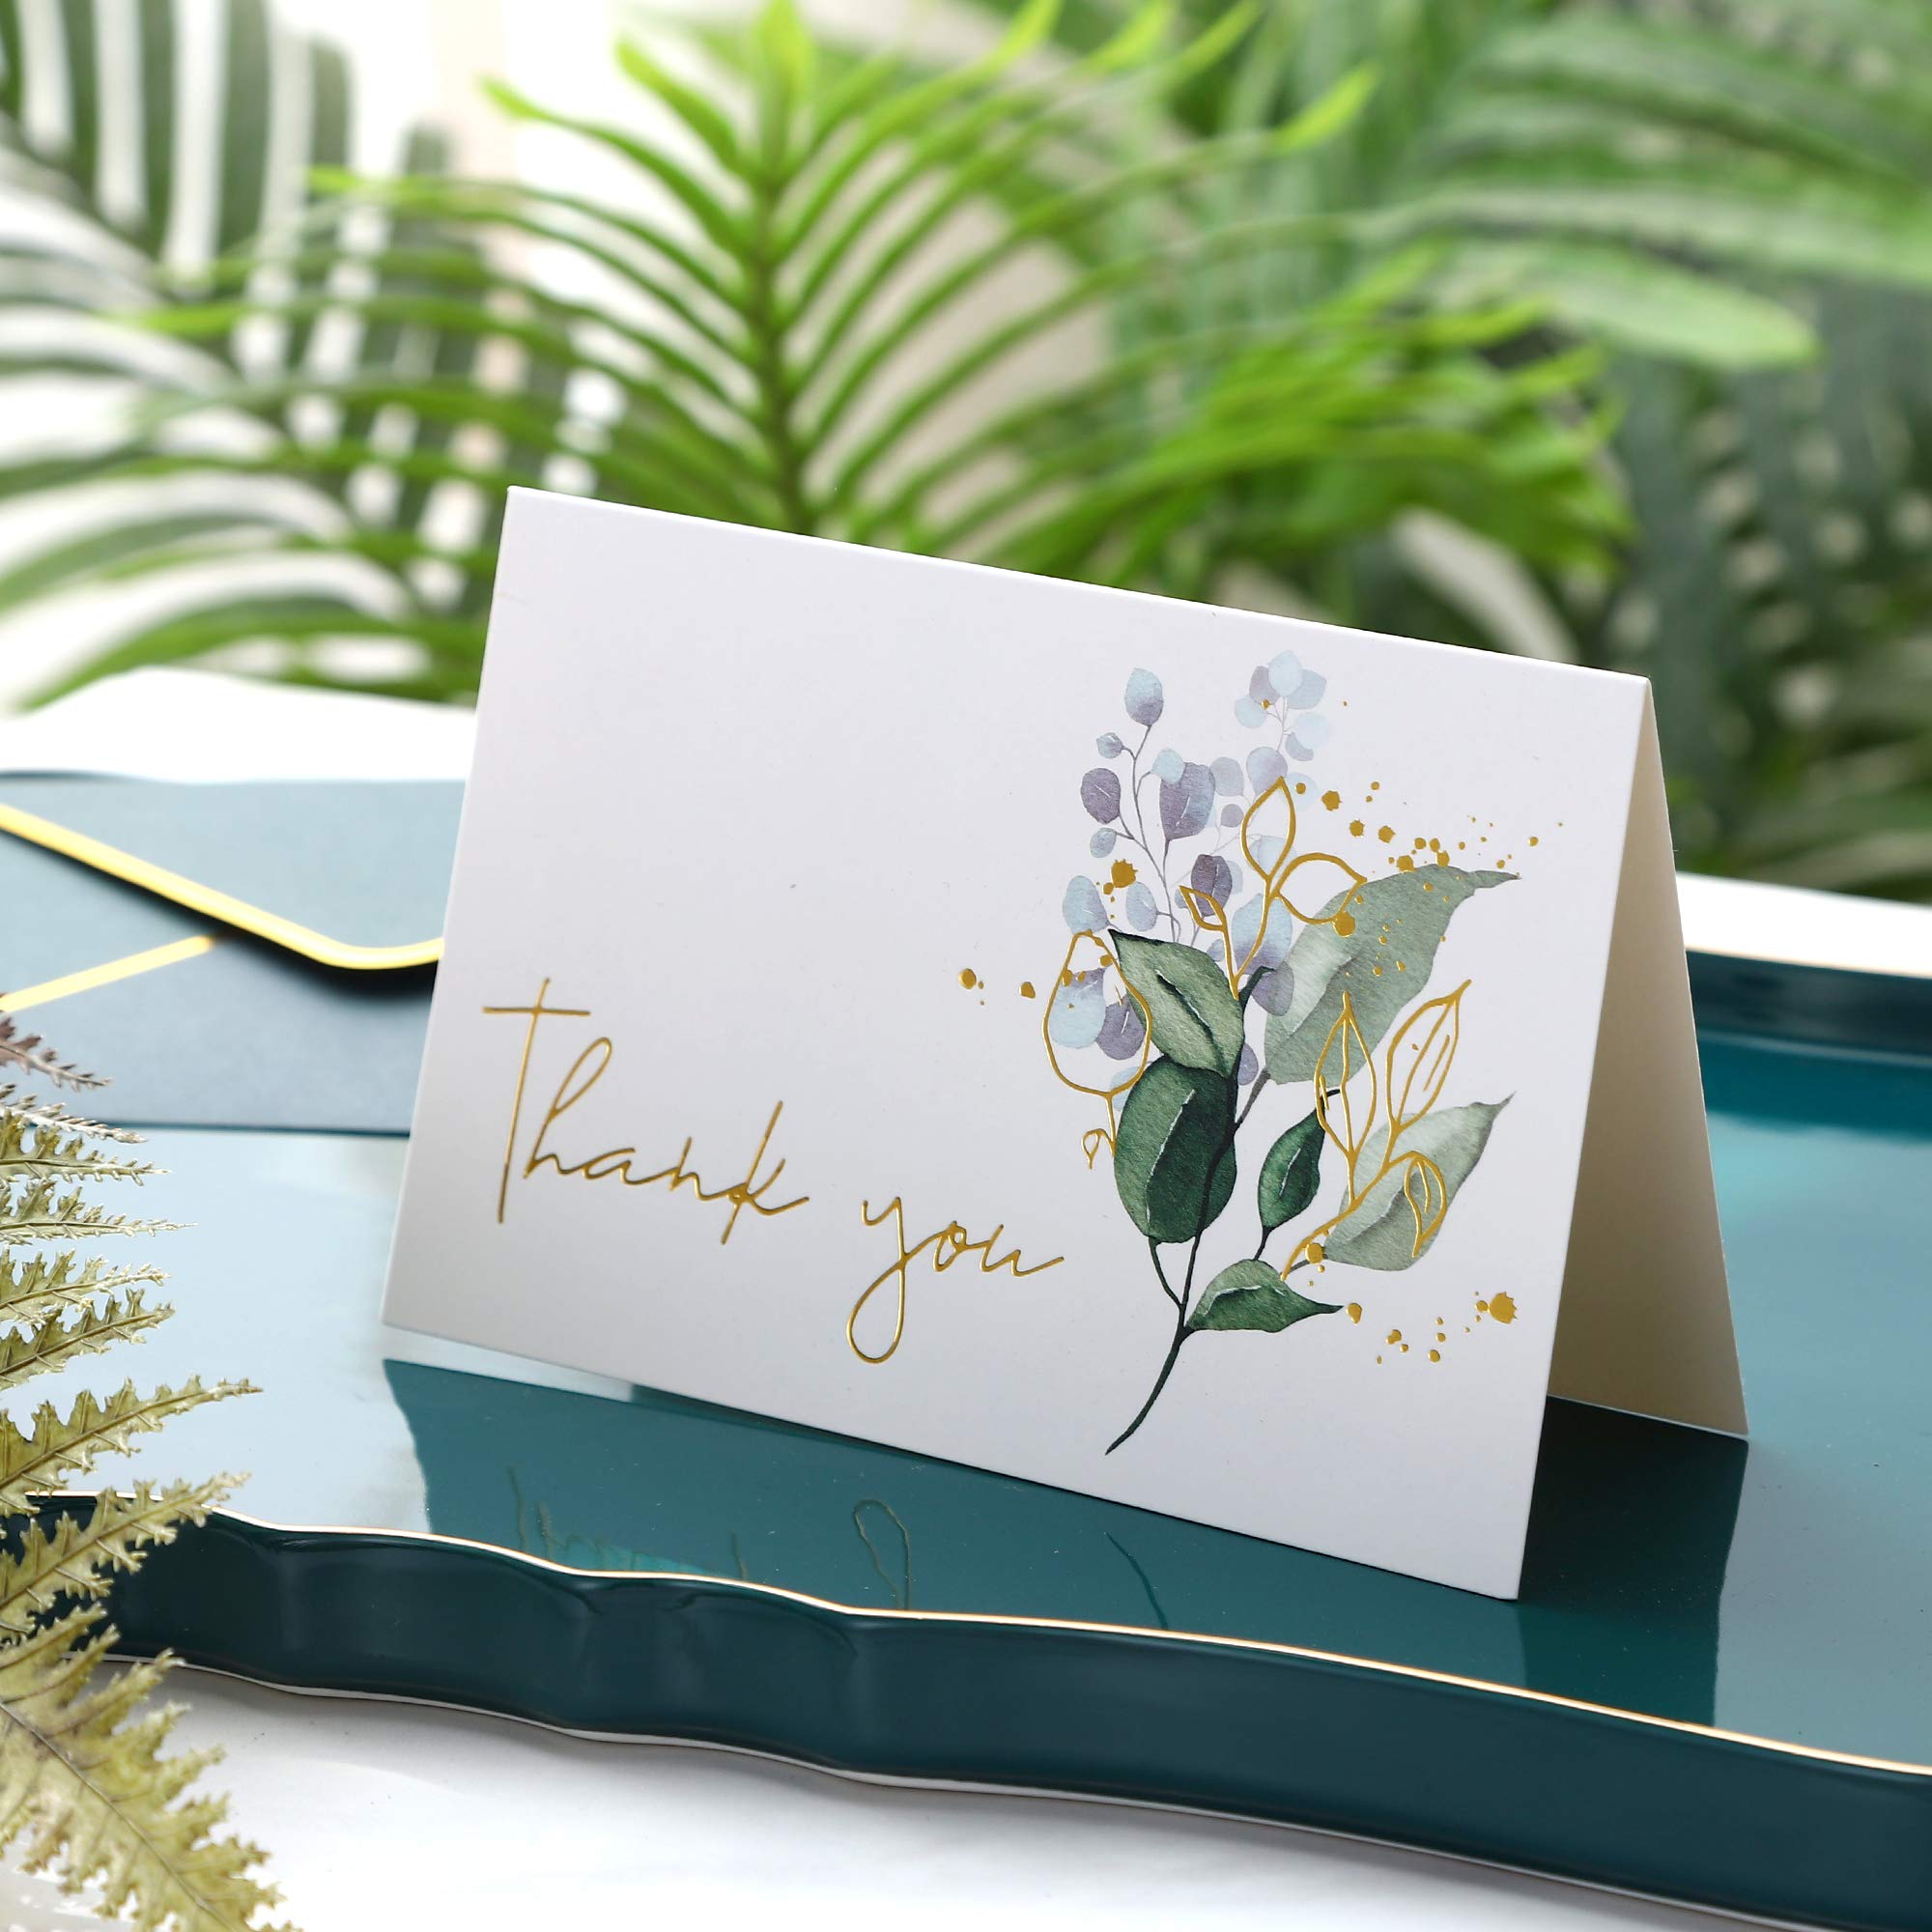 Heavy Duty Thank You Cards with Envelopes - 36 PK - Gold Thank You Notes 4x6 Inches Baby Shower Thank You Cards Wedding Thank You Cards Small Business Graduation Funeral Bridal Shower (Greenery)